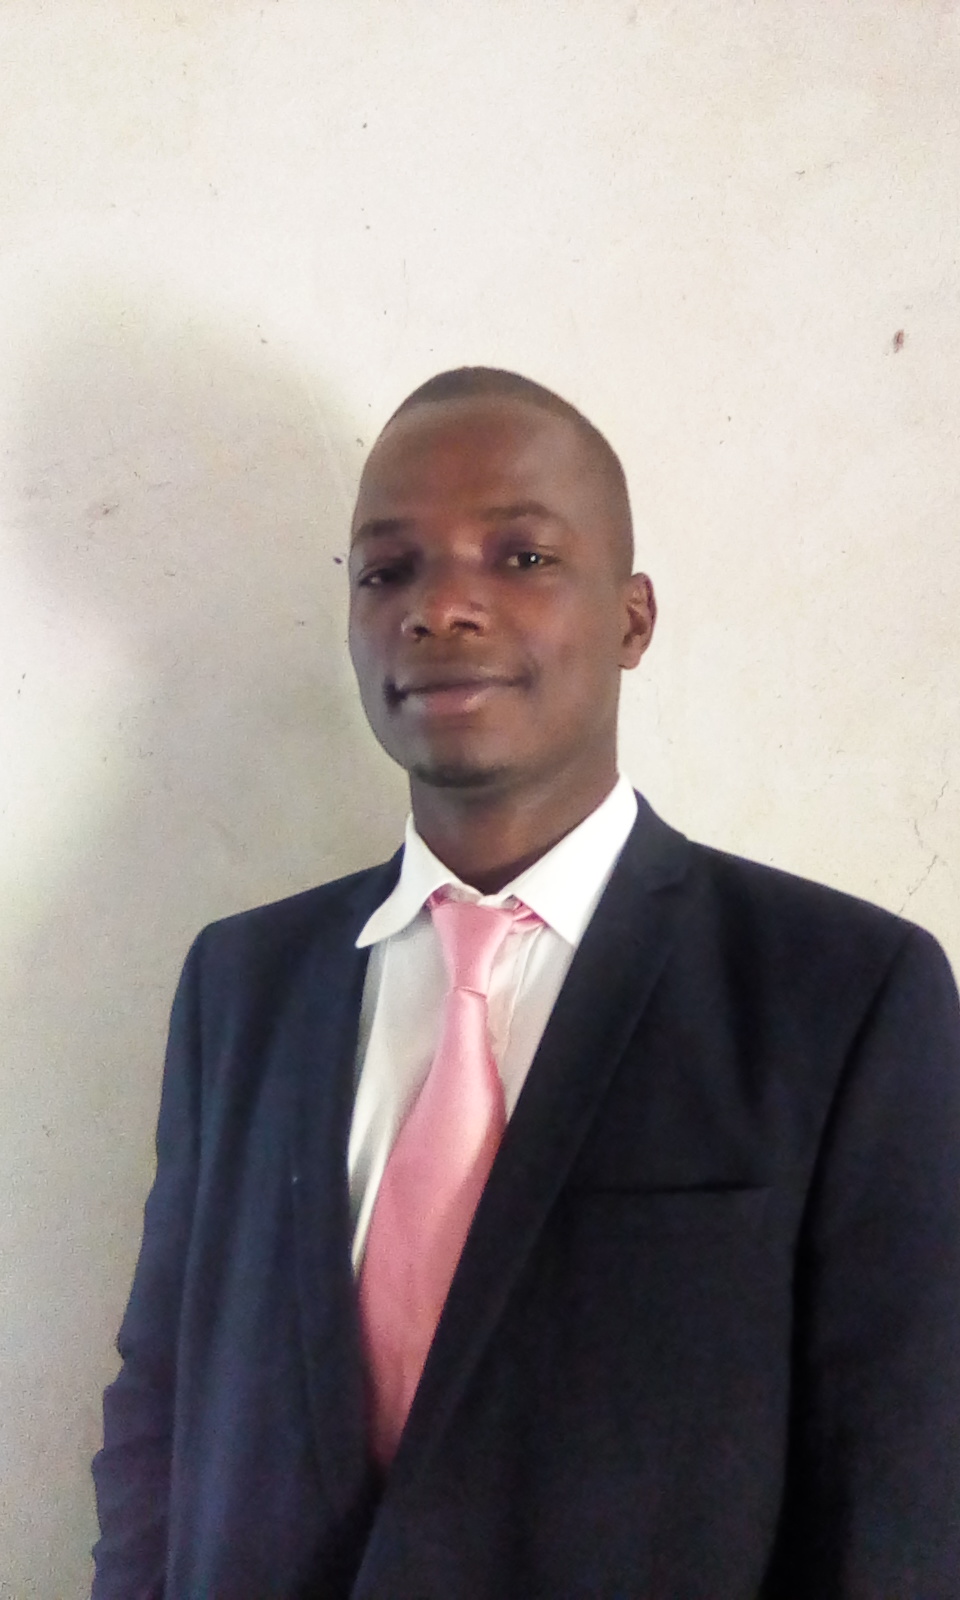 Alfred is currently a trainee at Kenya School of TVET, with a strong perception of becoming a vibrant tutor in Information